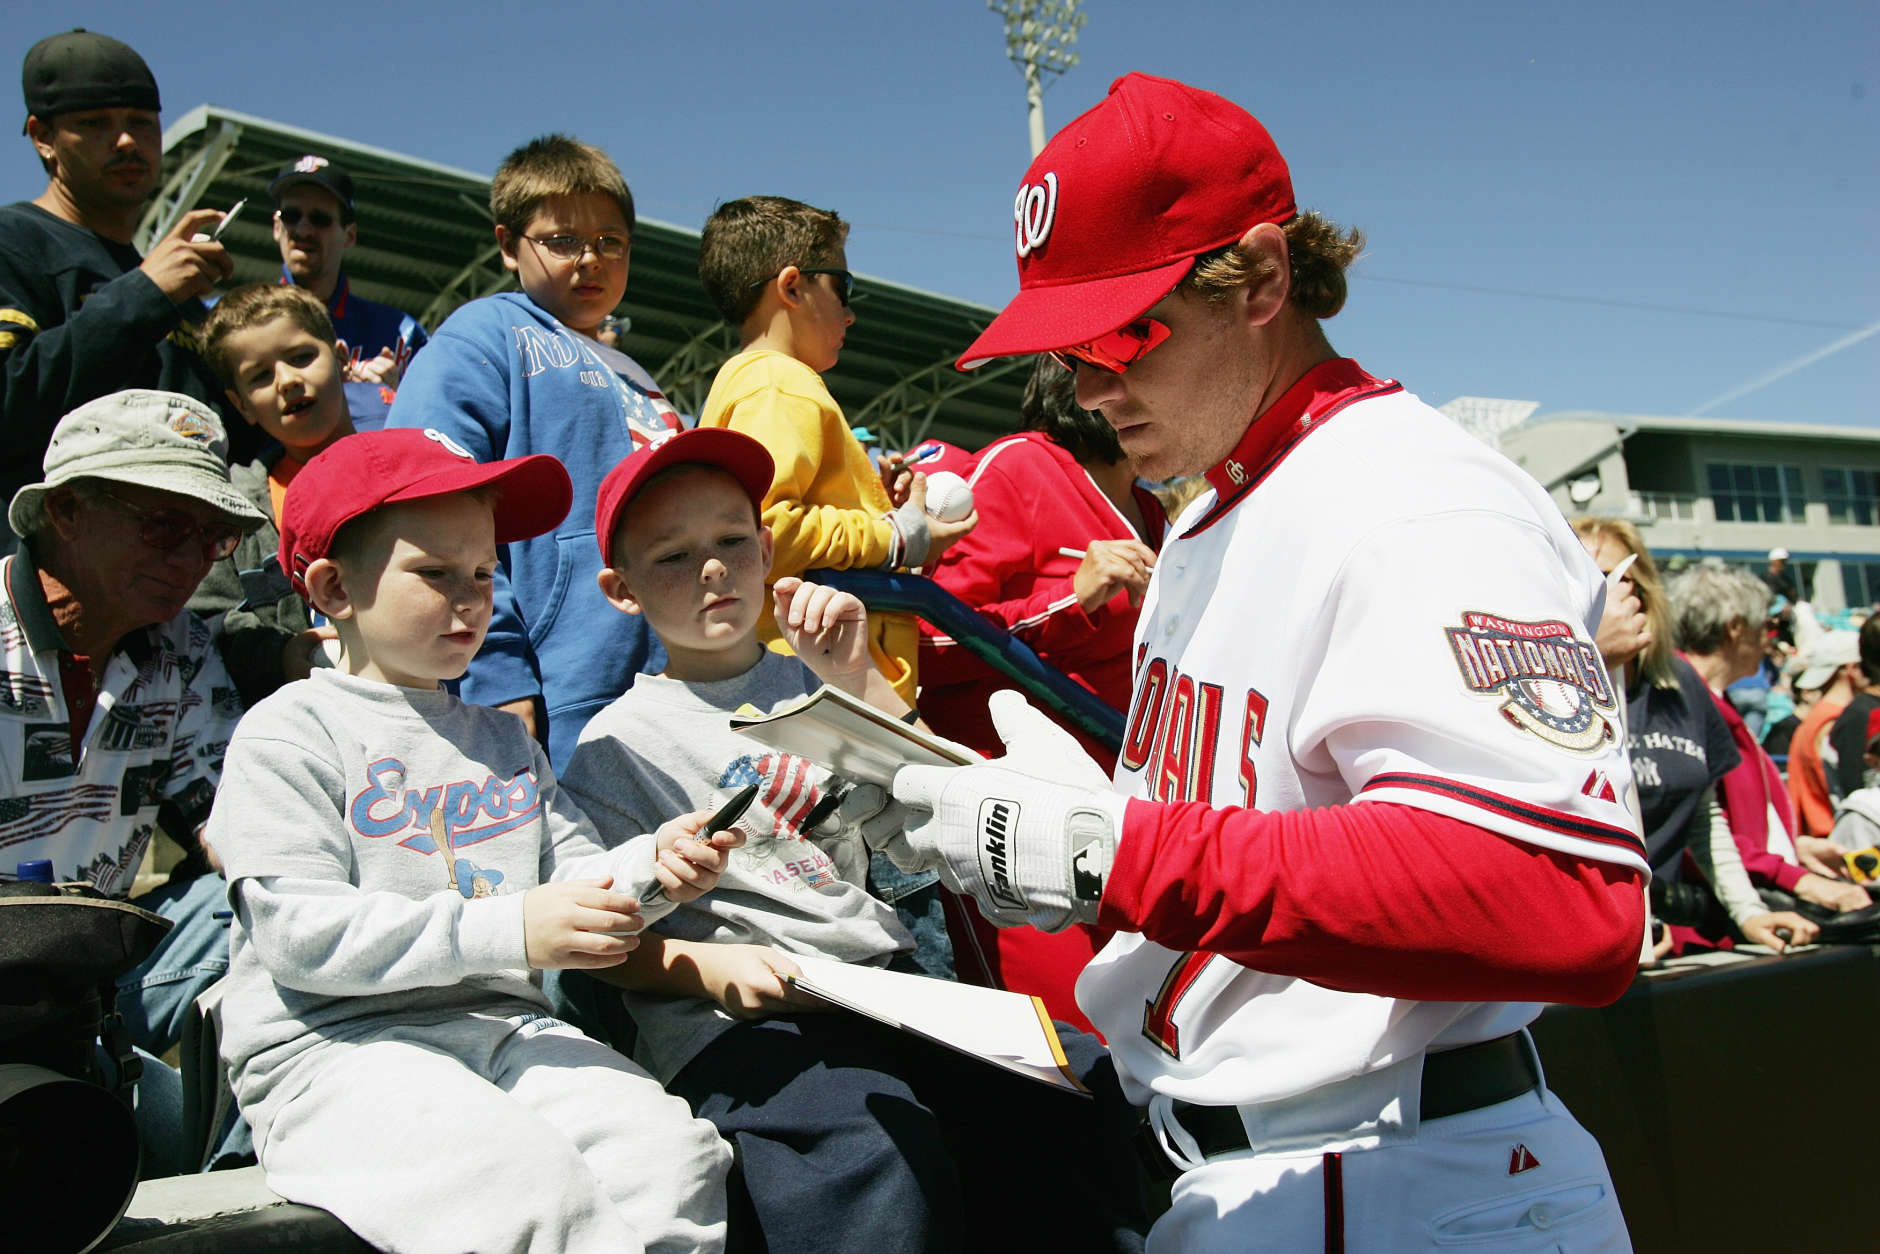 VIERA, FL - MARCH 2:  Infielder Brad Wilkerson #7 of the Washington Nationals signs autographs for brothers Kyle Ross, five-years-old and Paulie Ross, seven-years-old, of Merrit Island, Florida prior to the game against the New York Mets during MLB Spring Training action on March 2, 2005 at the Space Coast Stadium in Viera, Florida. The Washington Nationals defeated the New York Mets 5-3. (Photo by Doug Pensinger/Getty Images)